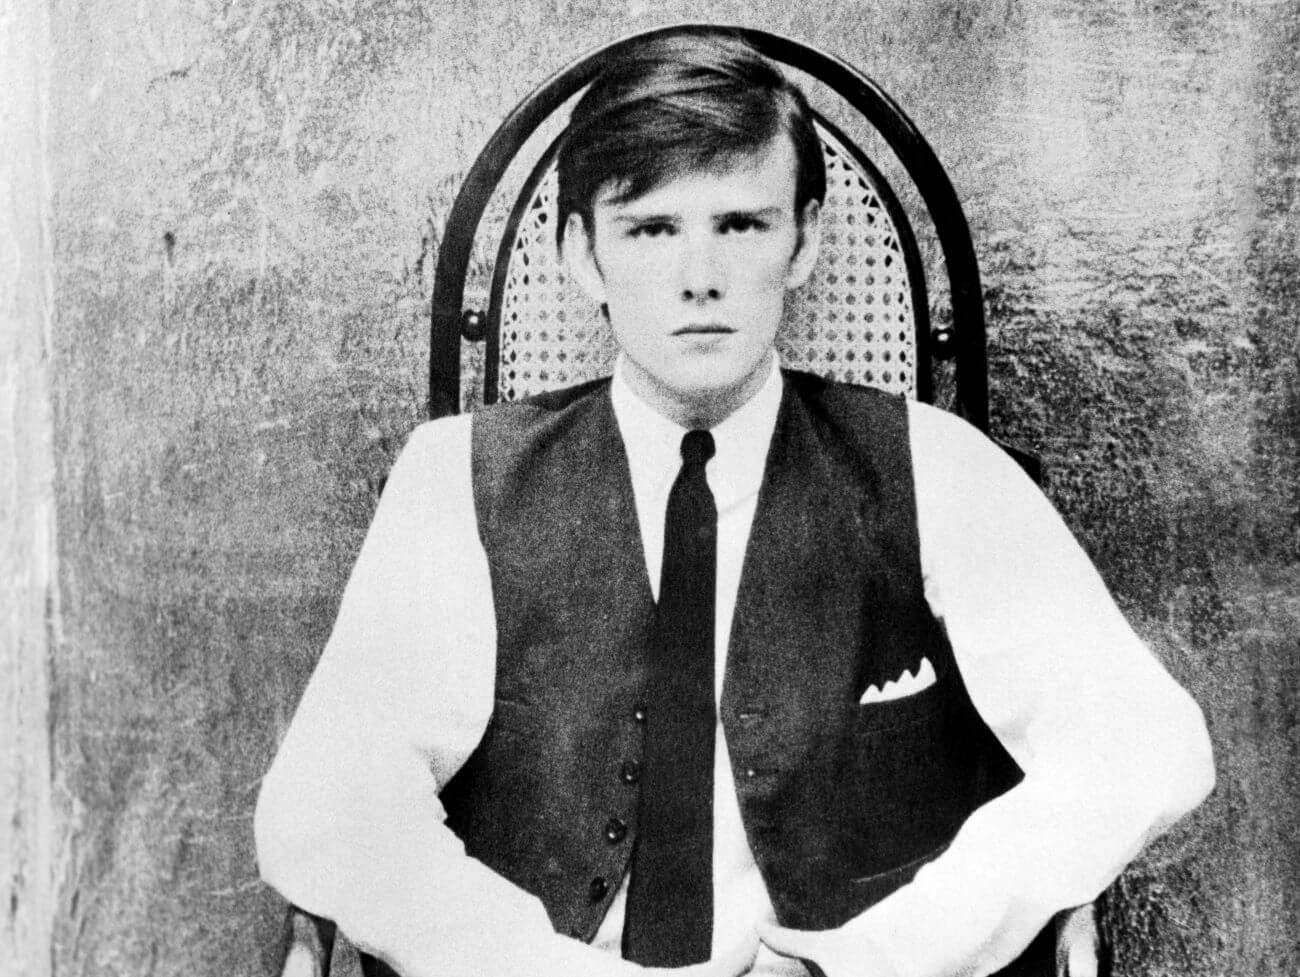 A black and white picture of The Beatles' Stuart Sutcliffe wearing a vest and tie and sitting in a chair.